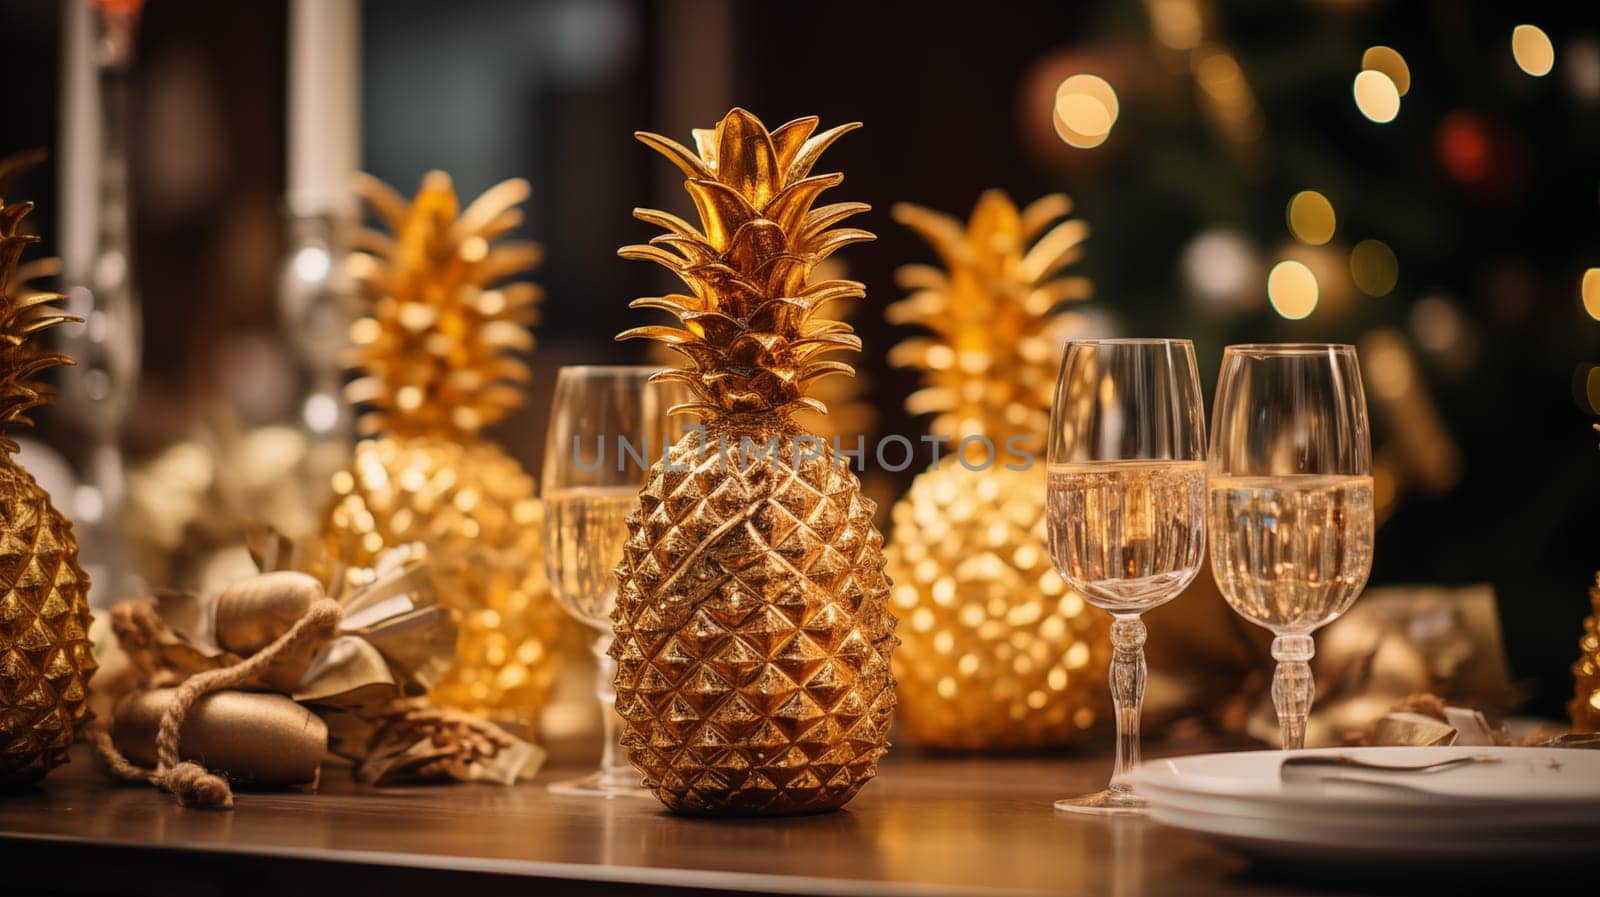 several golden pineapples and glasses of champagne, stand on plates on the table, warm evening light.